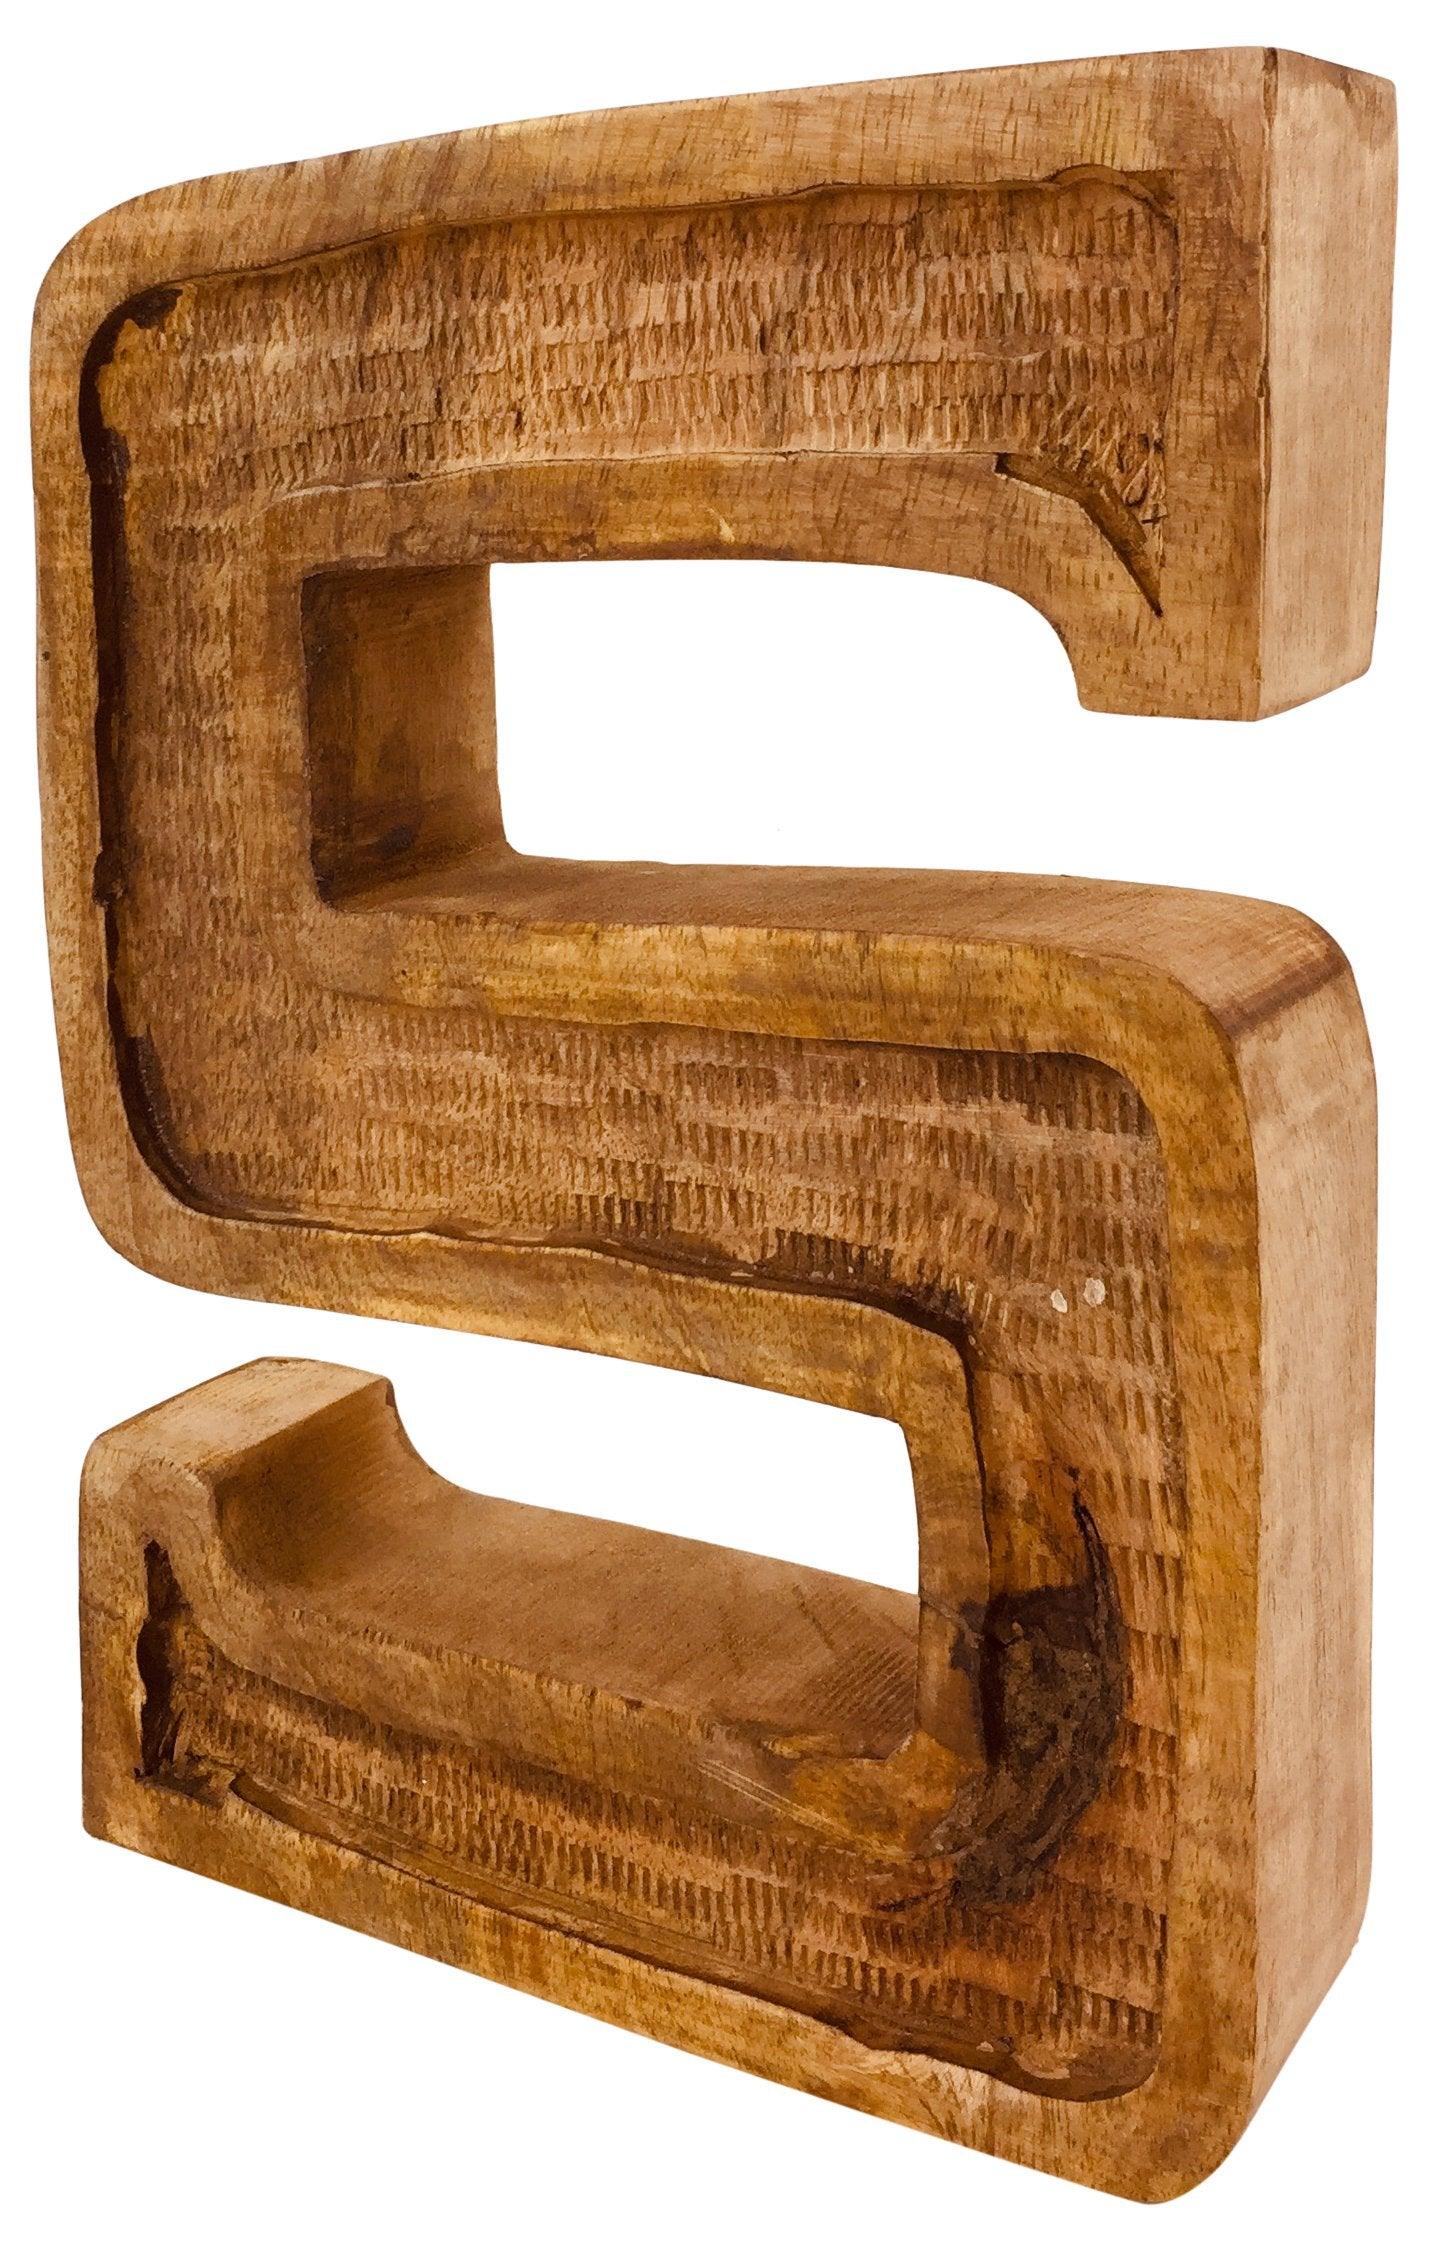 View Hand Carved Wooden Embossed Letter S information